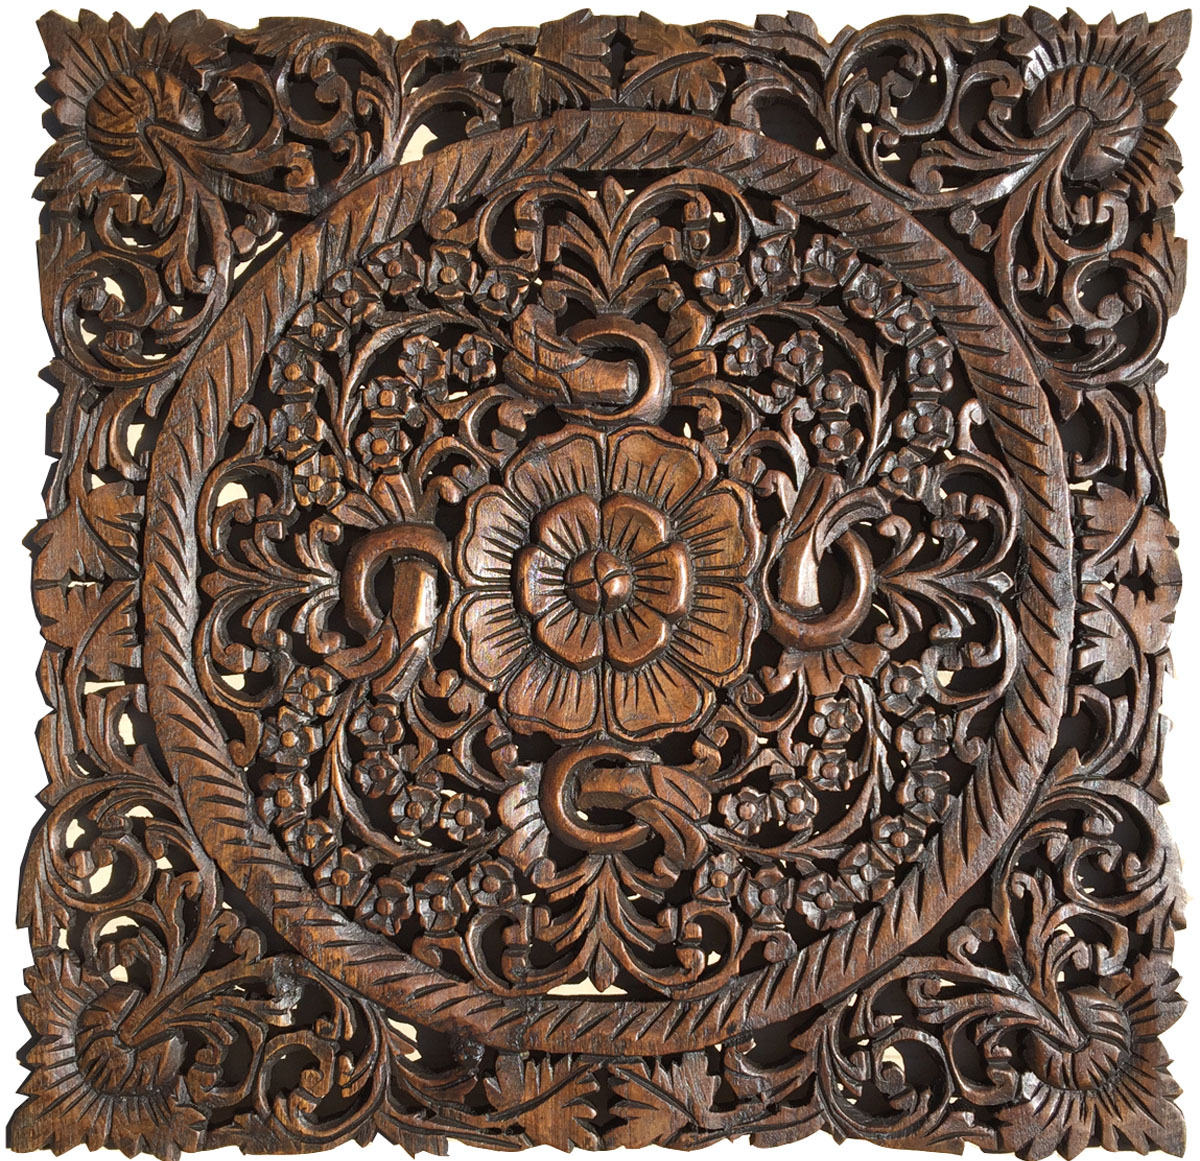 Carved Wood Wall Decor.Oriental Floral Wood Wall Art Plaque.Dark Brown